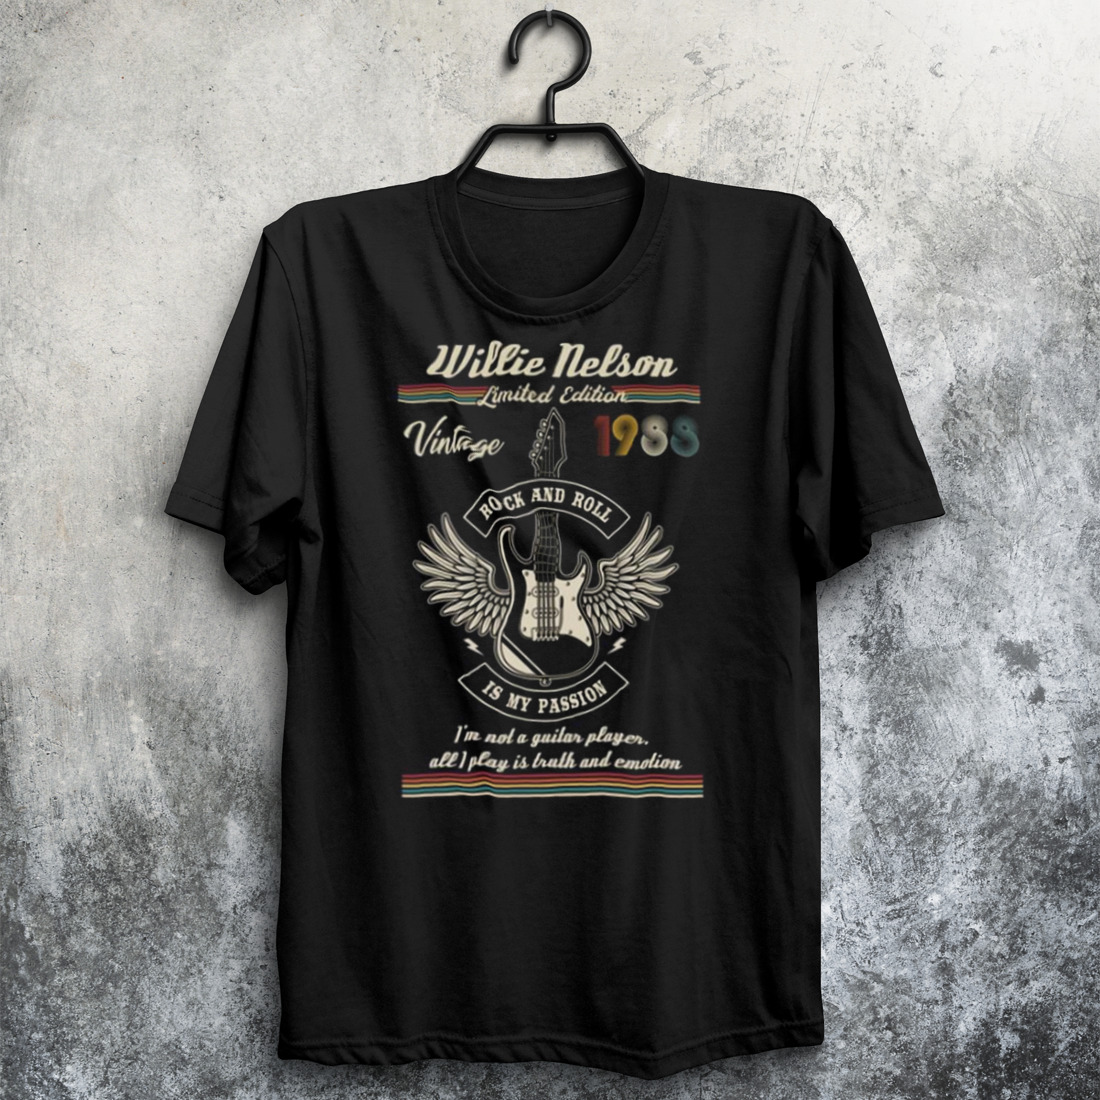 Willie Nelson Passion shirt